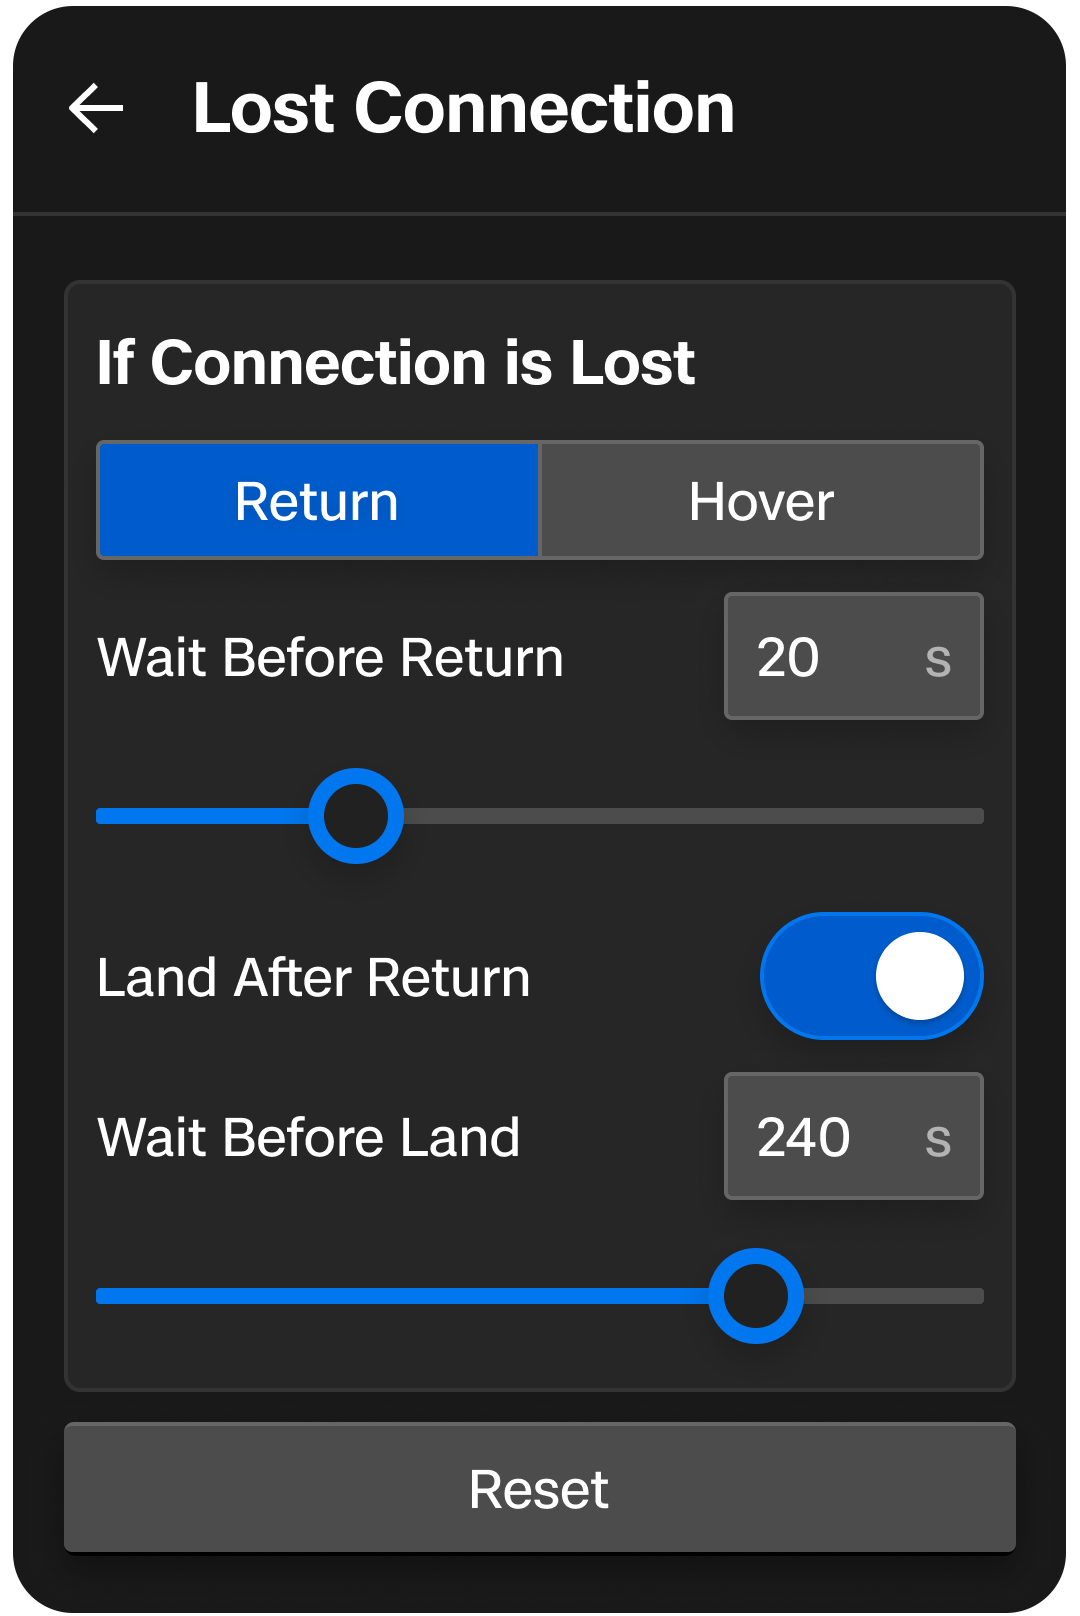 CS_App3_media_UI_lost_connection_return_rounded.png